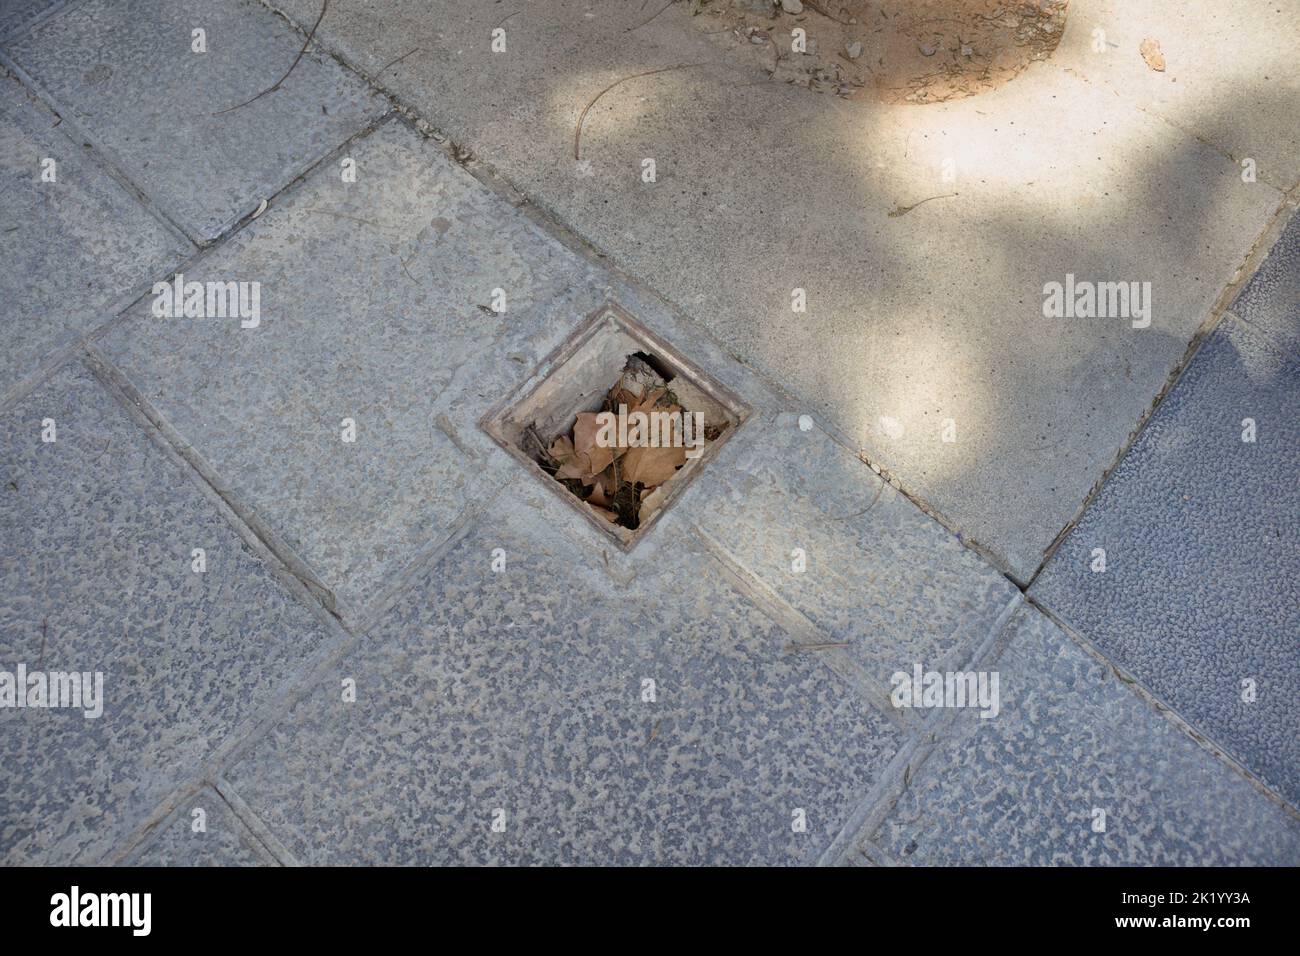 Image of a trap that is badly covered or broken on a sidewalk of a walk in a city Stock Photo